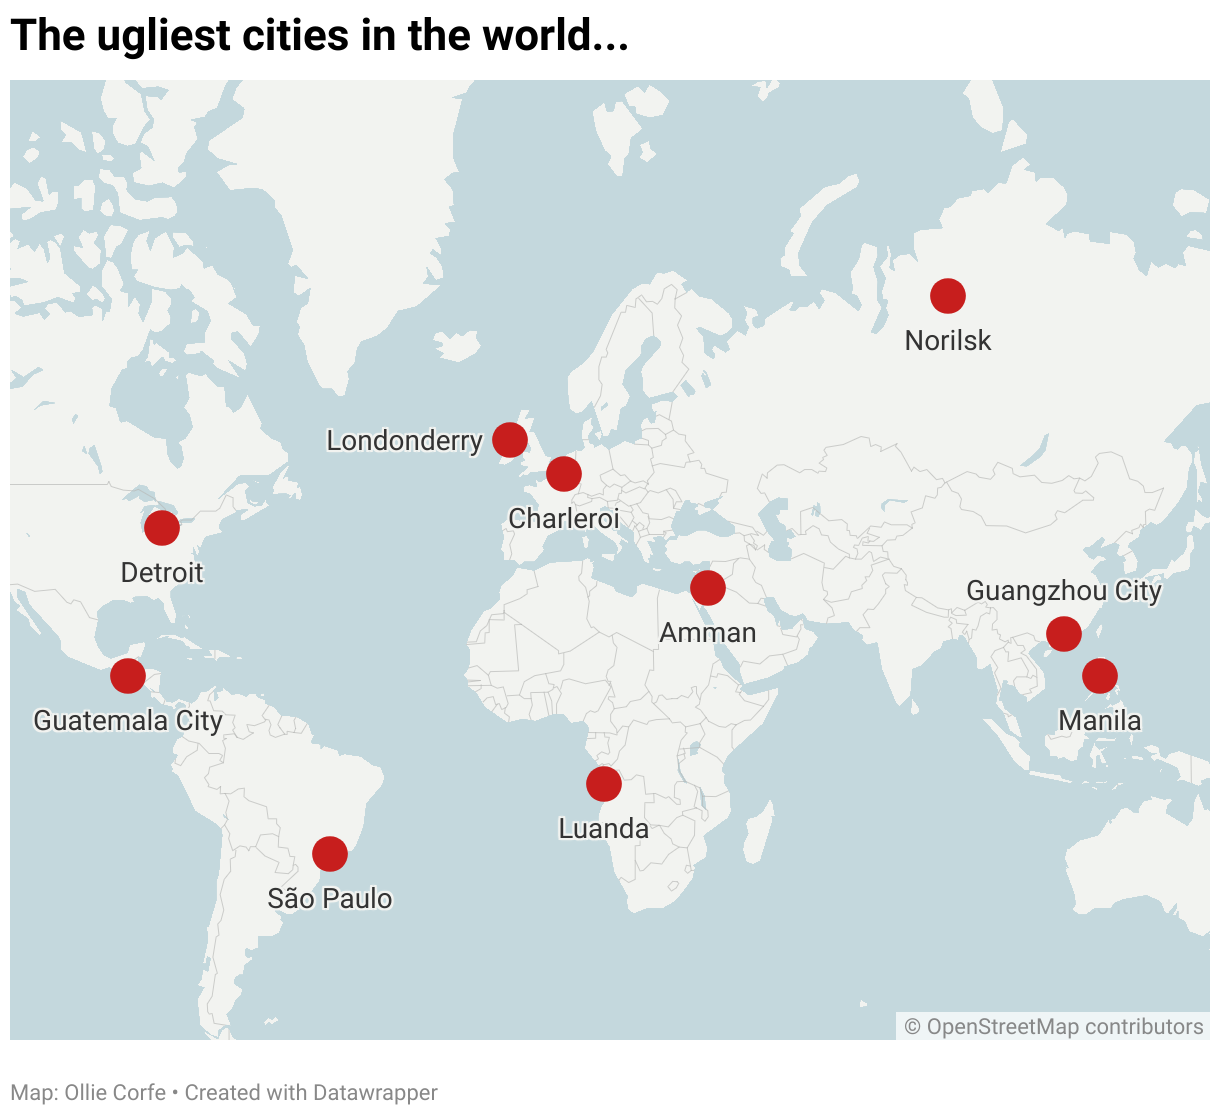 Map of ugliest cities.